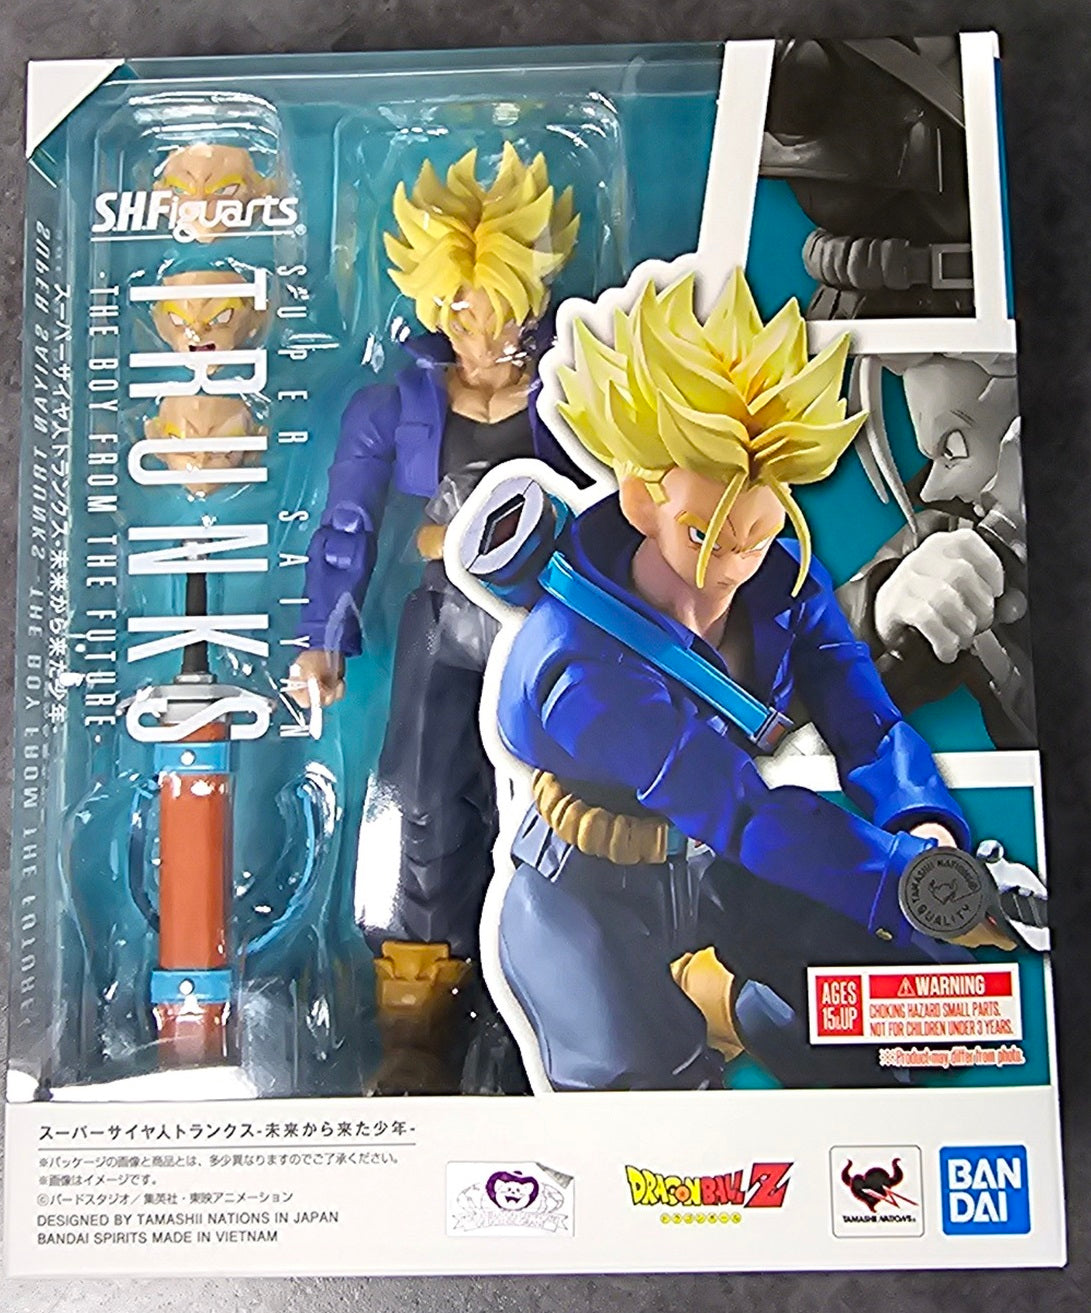 S.H. Figuarts Dragon Ball Z Super Saiyan Trunks -The Boy From The Future- (Reissue) Action Figure